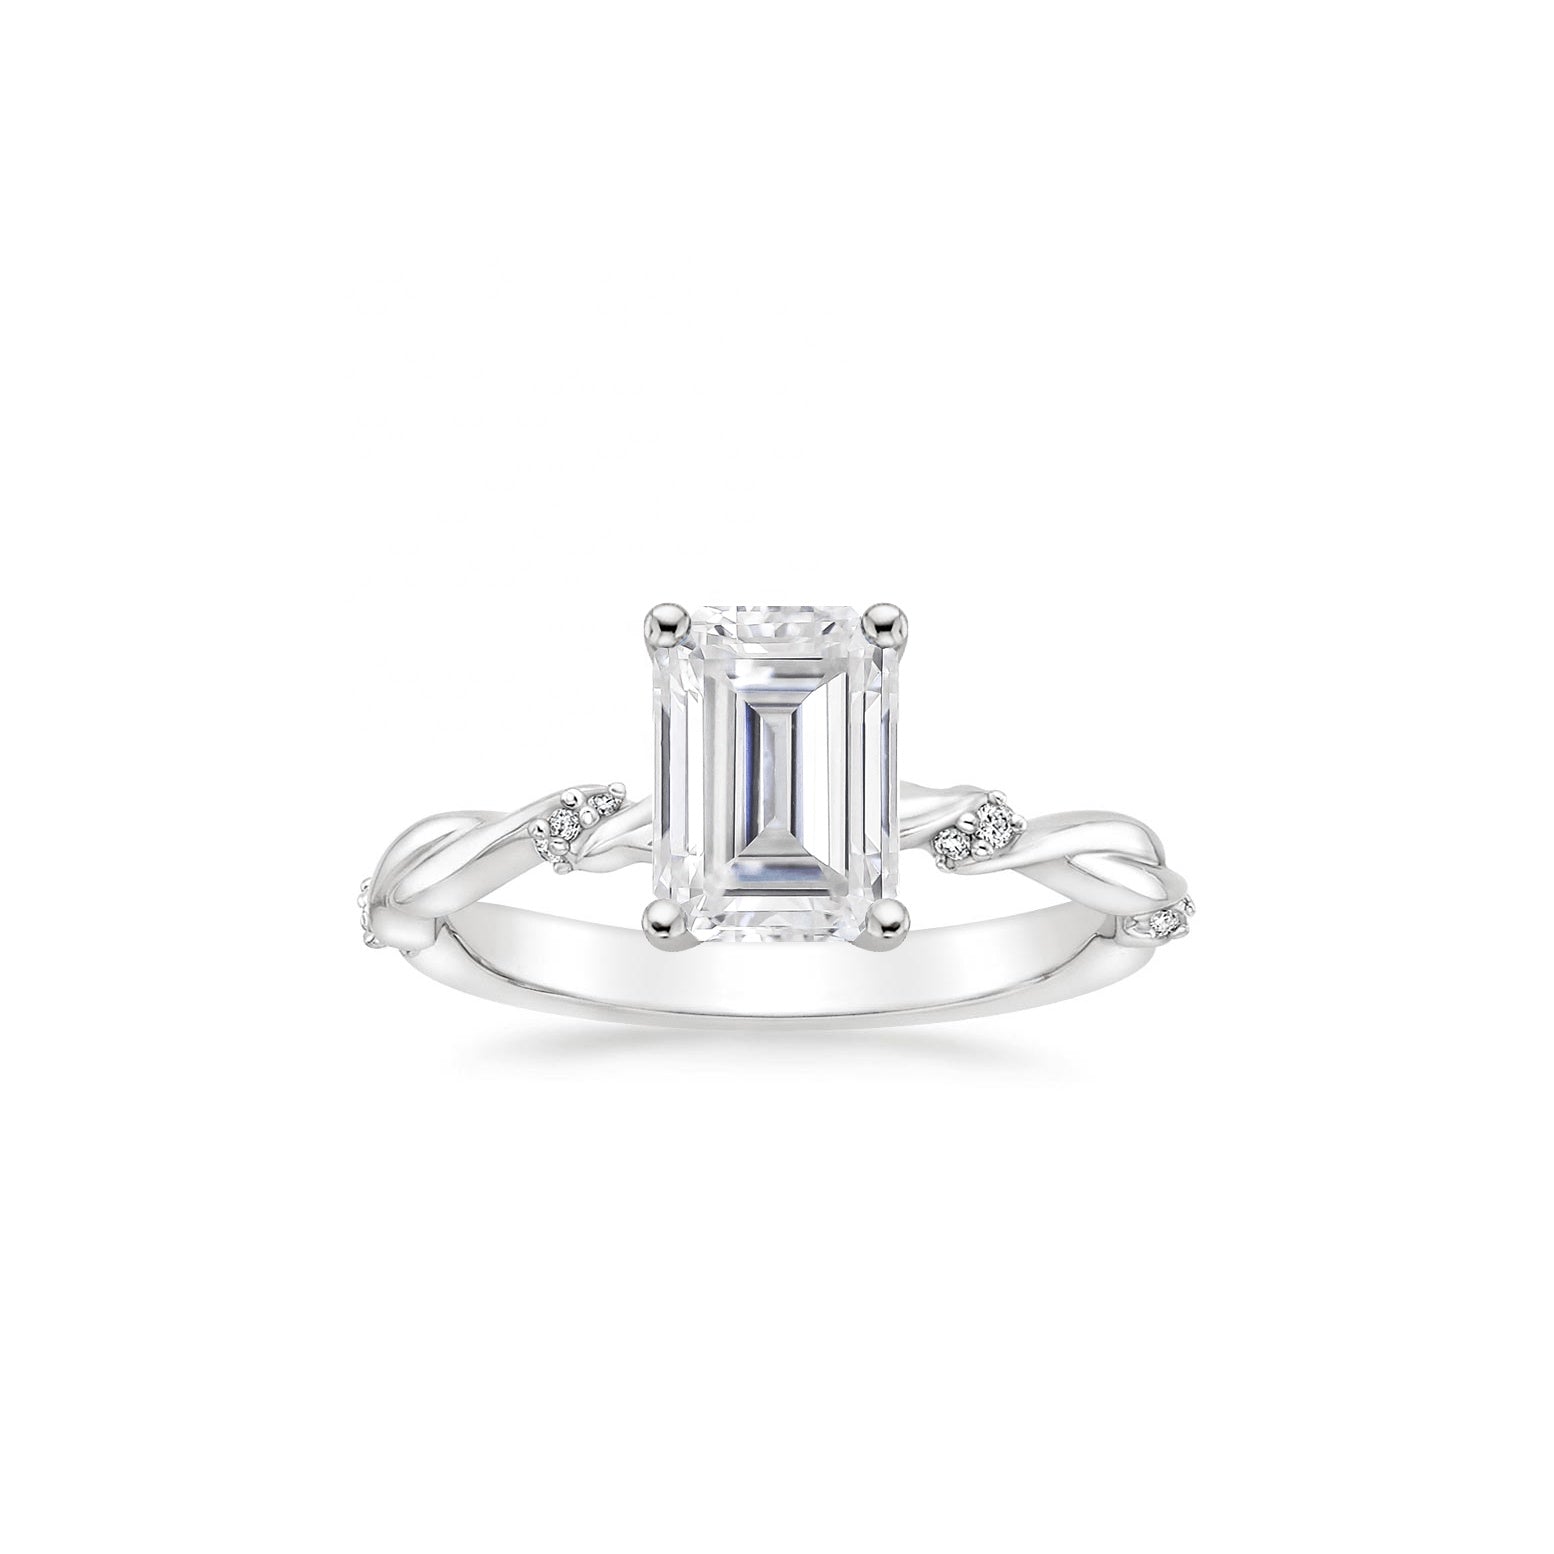 1.0ct Emerald-Cut Solitaire 4-Claw Moissanite Gold Ring